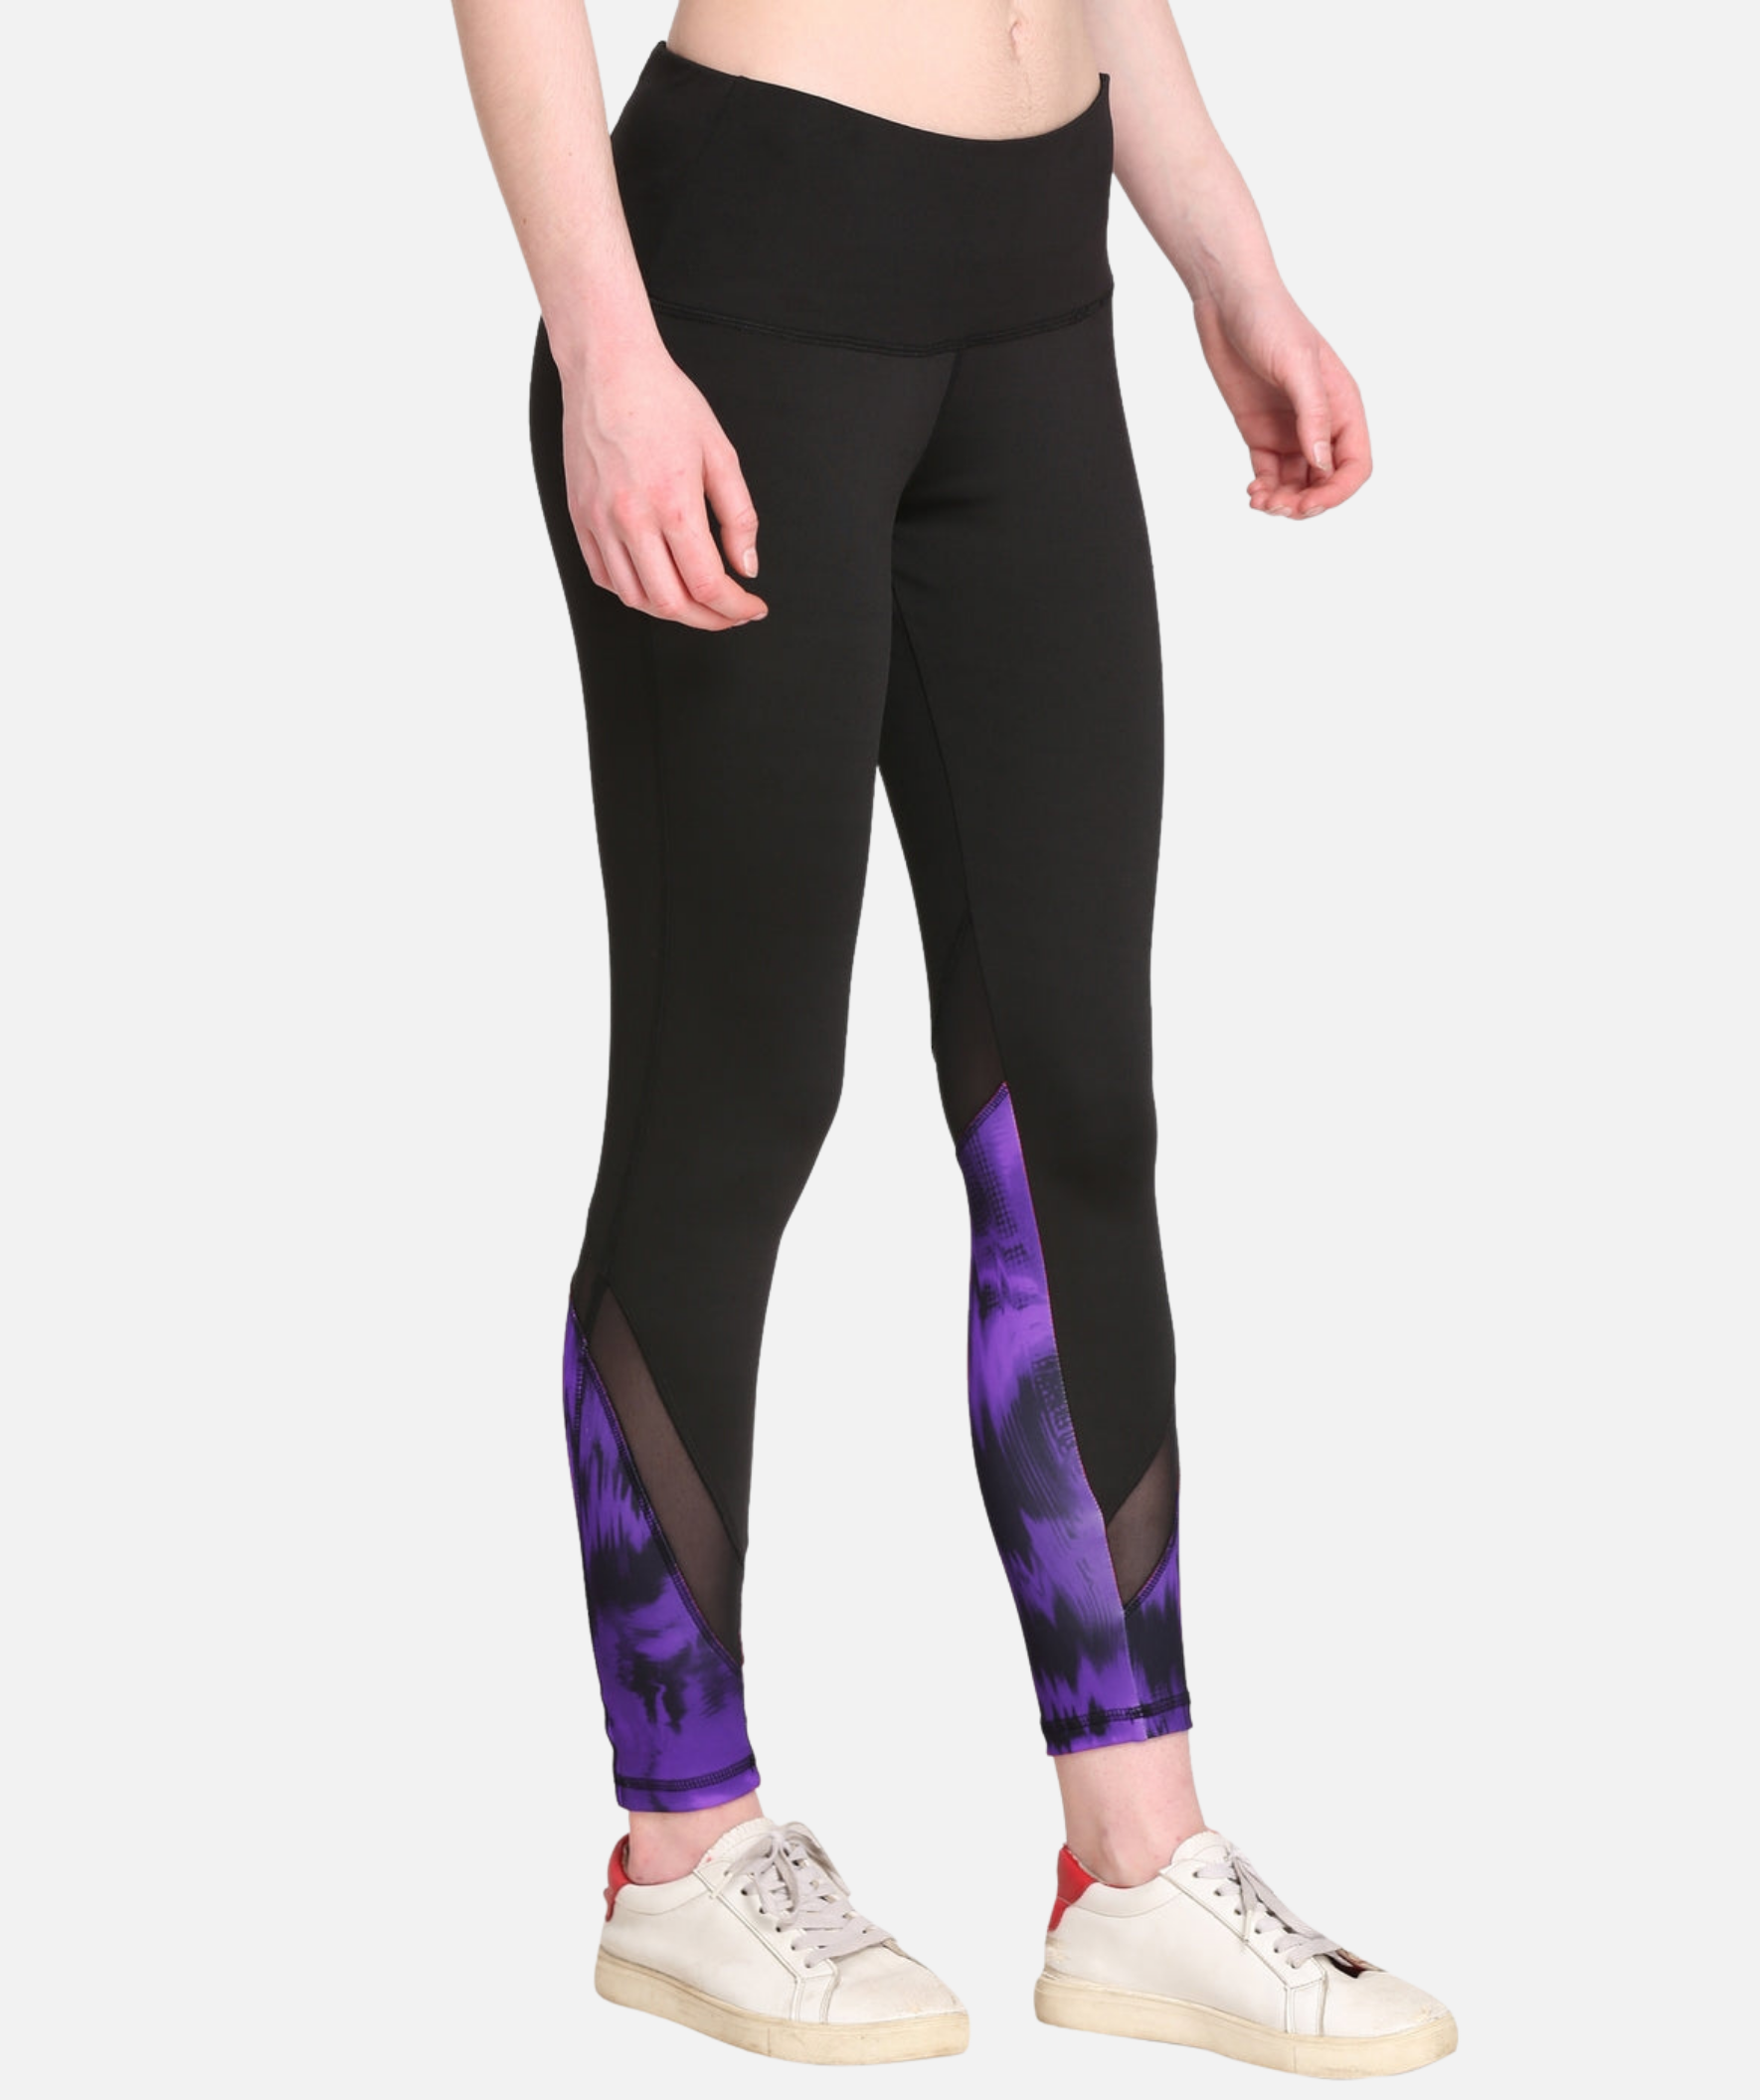 Zumba women's exercise clothes, Funky Pattern